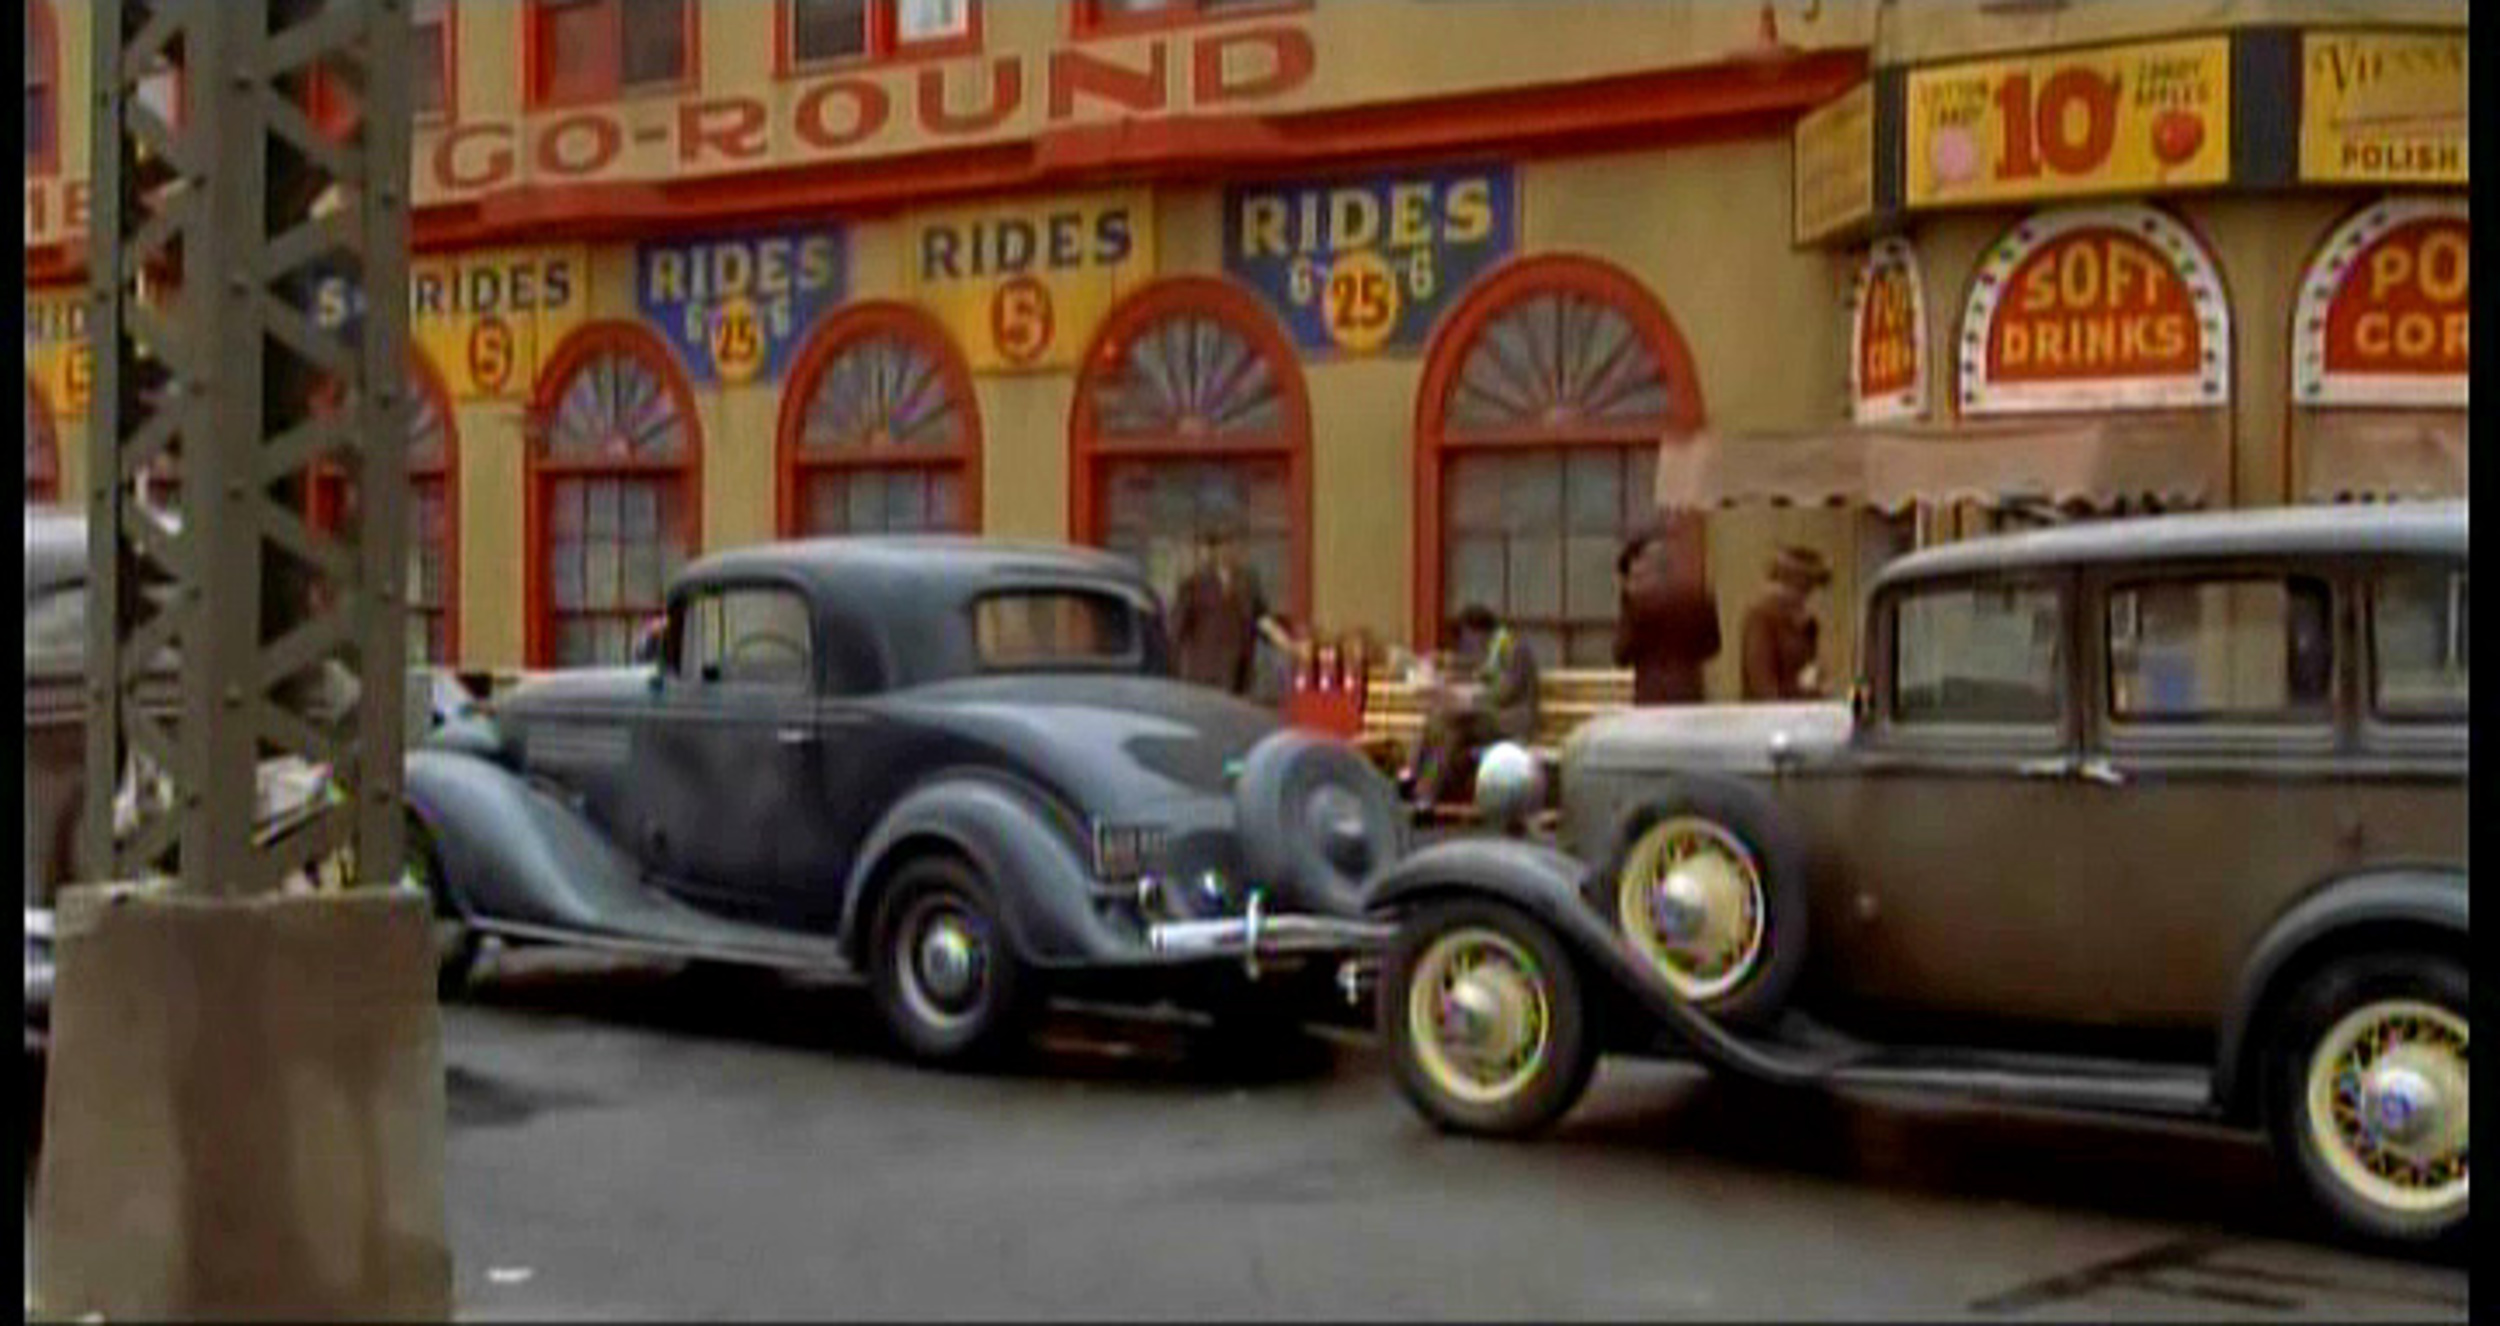 <p>Tony Bill, one of the producers of the film, was also a fan of antique cars. This came in handy because he was able to loan the movie the 1935 Pierce Arrow that serves as Lonnegan’s car in the movie. It was extremely rare and had Bill not been a producer on the film they likely would have never found another car of that kind.</p><p>You may also like: <a href='https://www.yardbarker.com/entertainment/articles/20_facts_you_might_not_know_about_the_hunt_for_red_october_010924/s1__37662044'>20 facts you might not know about 'The Hunt for Red October'</a></p>